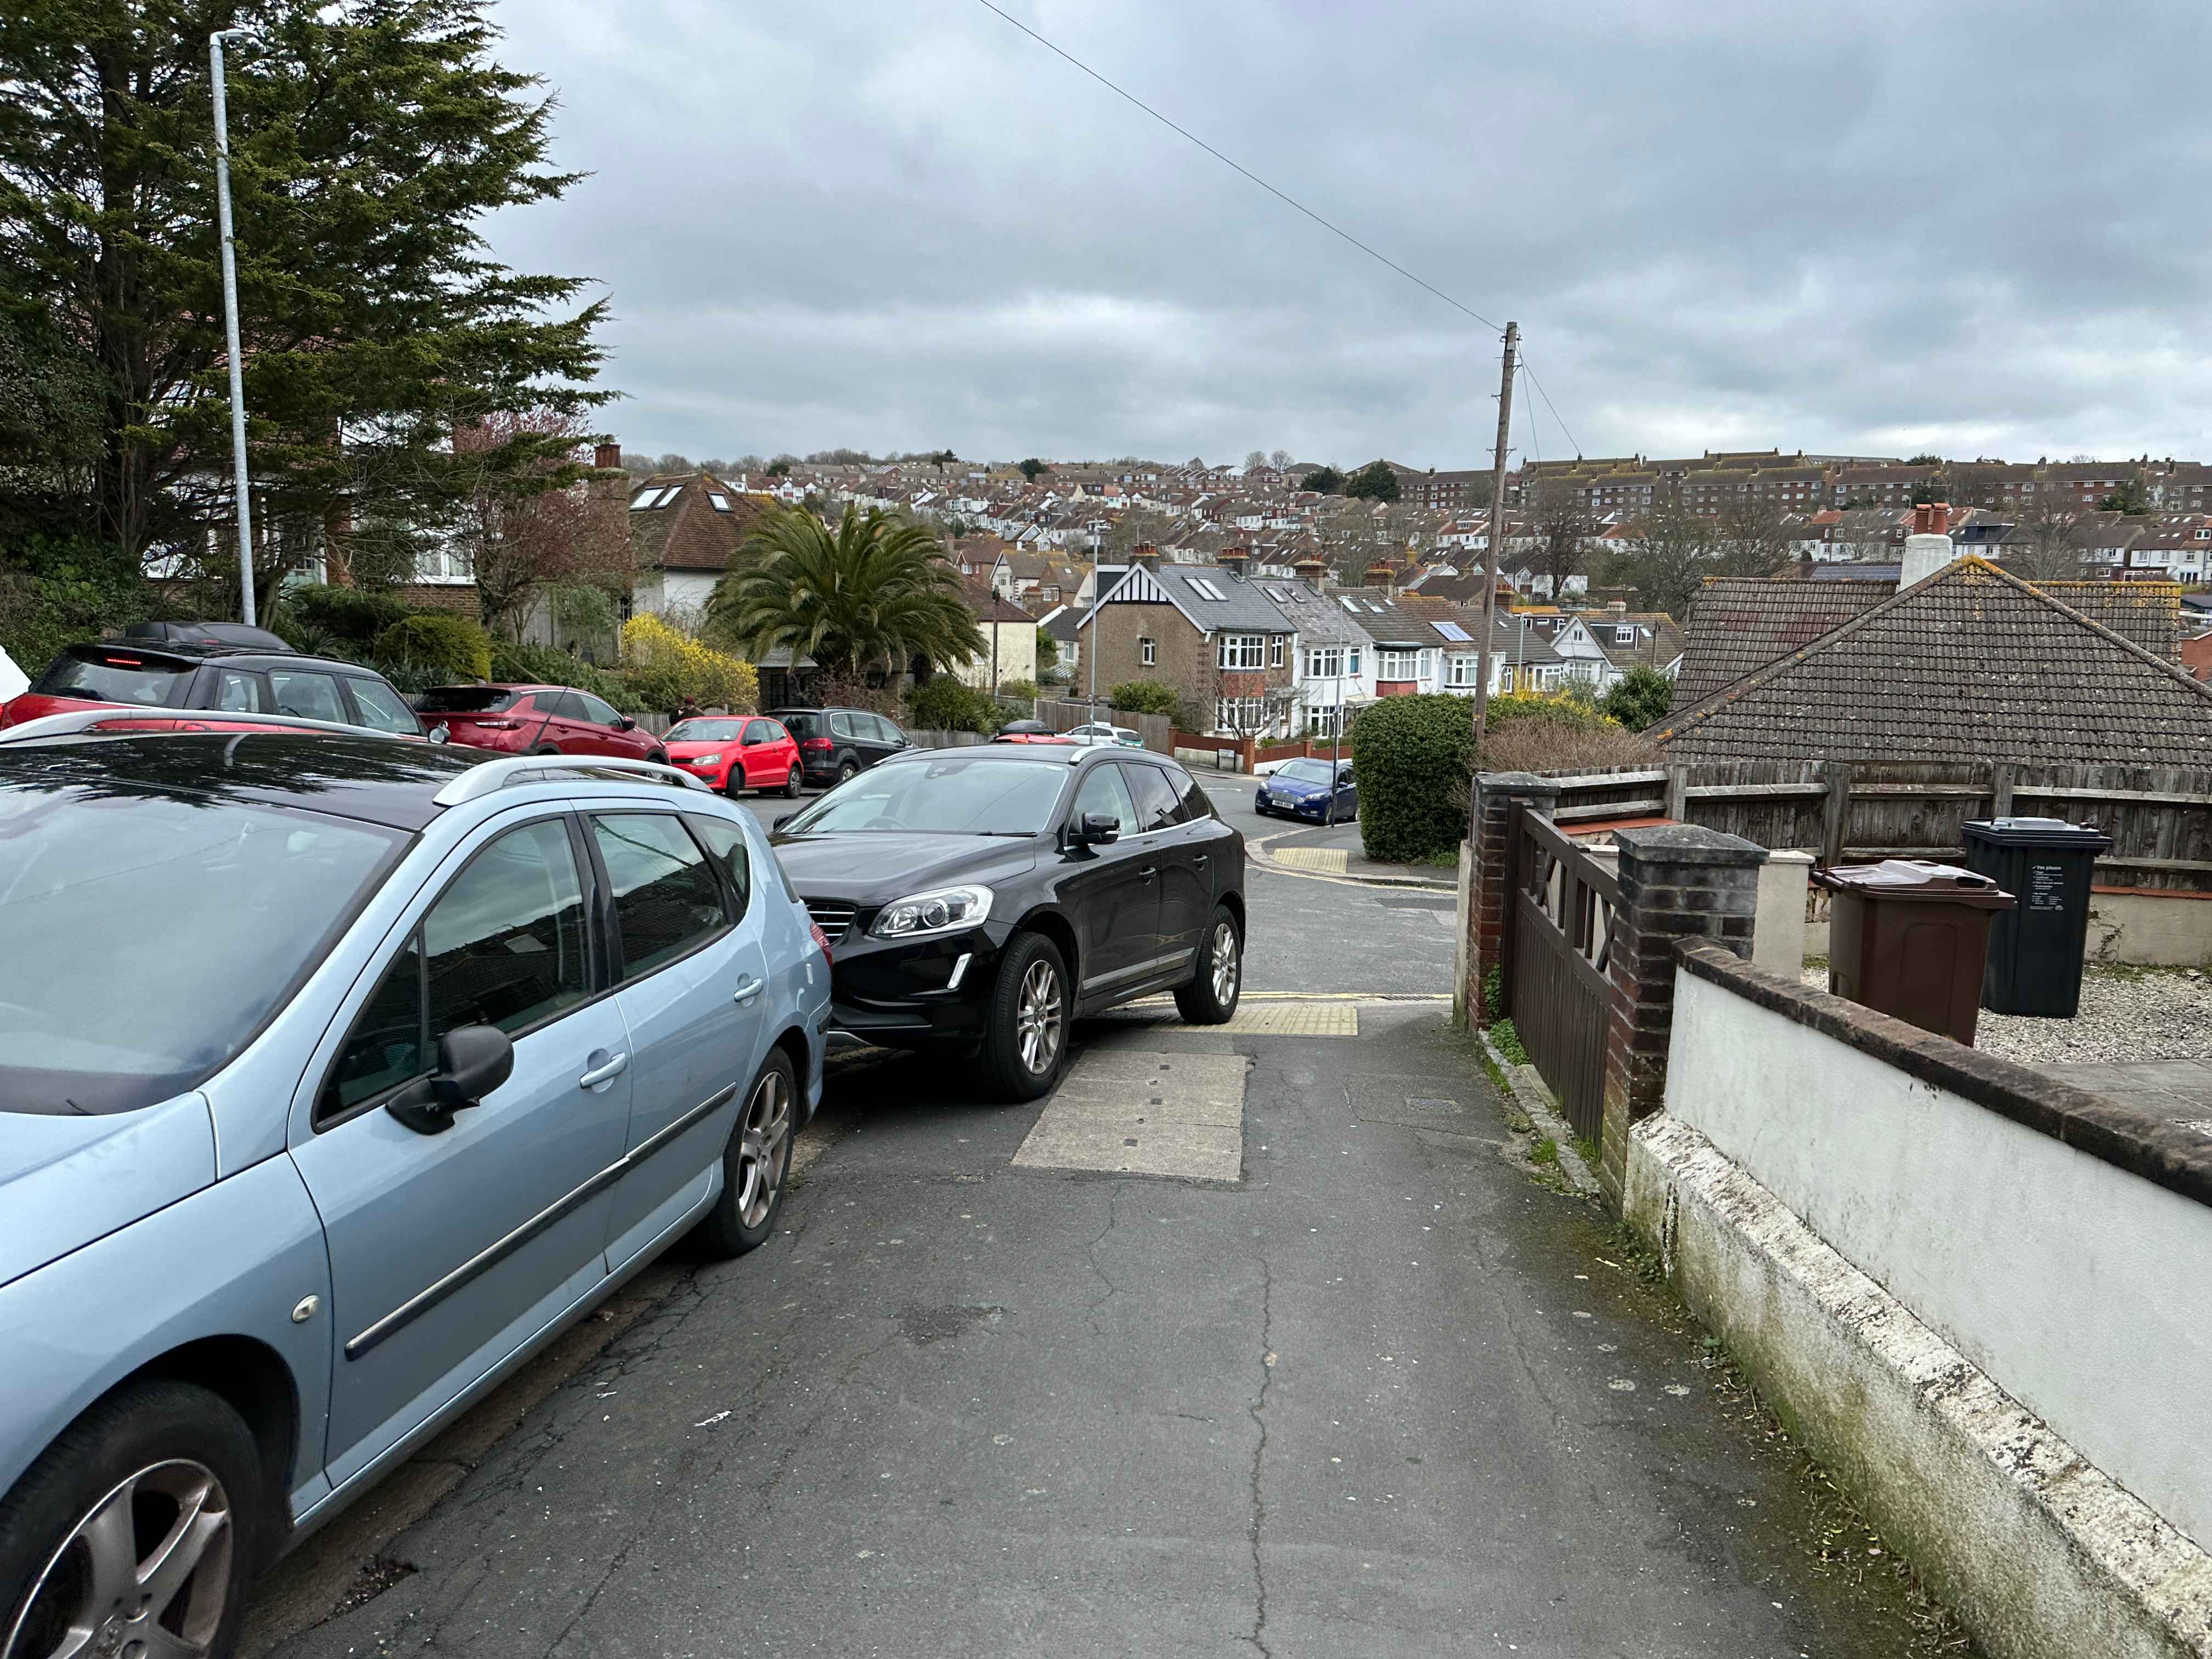 Photograph of DF65 ZZV - a Black Volvo XC60 parked in Hollingdean by a non-resident. The third of eight photographs supplied by the residents of Hollingdean.